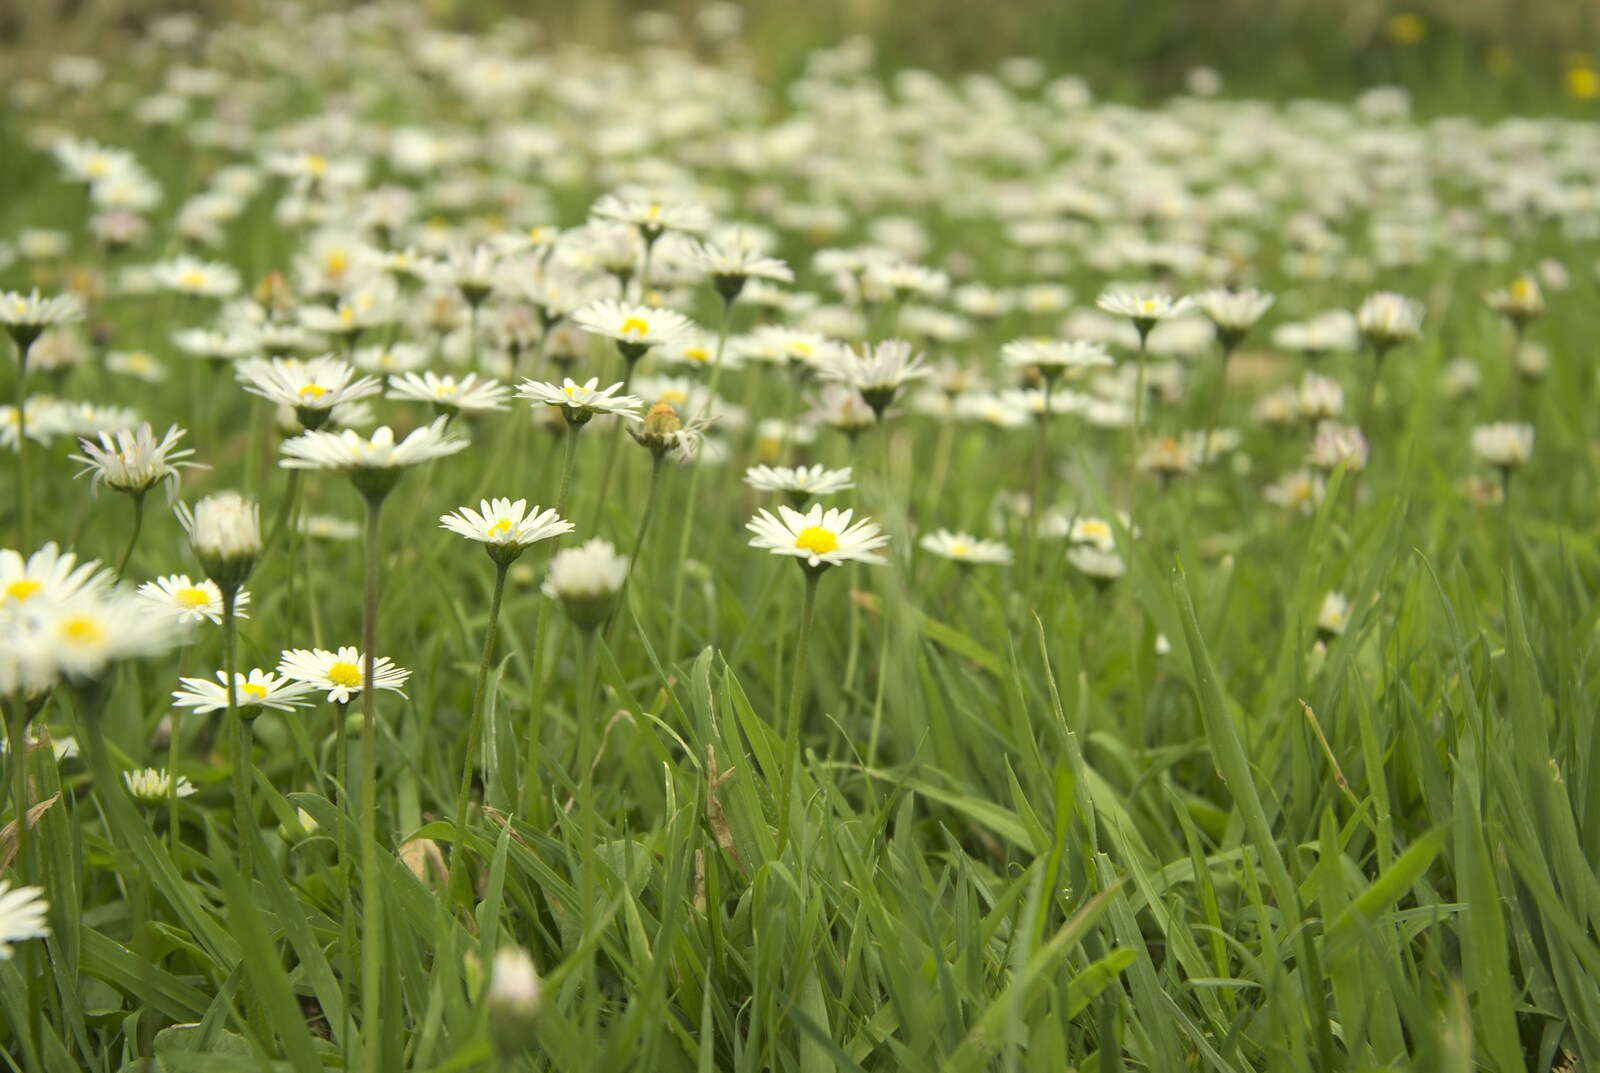 Daisies in the lawn from Wedding-Eve Beers at The Swan Inn, Brome, Suffolk - 2nd July 2010